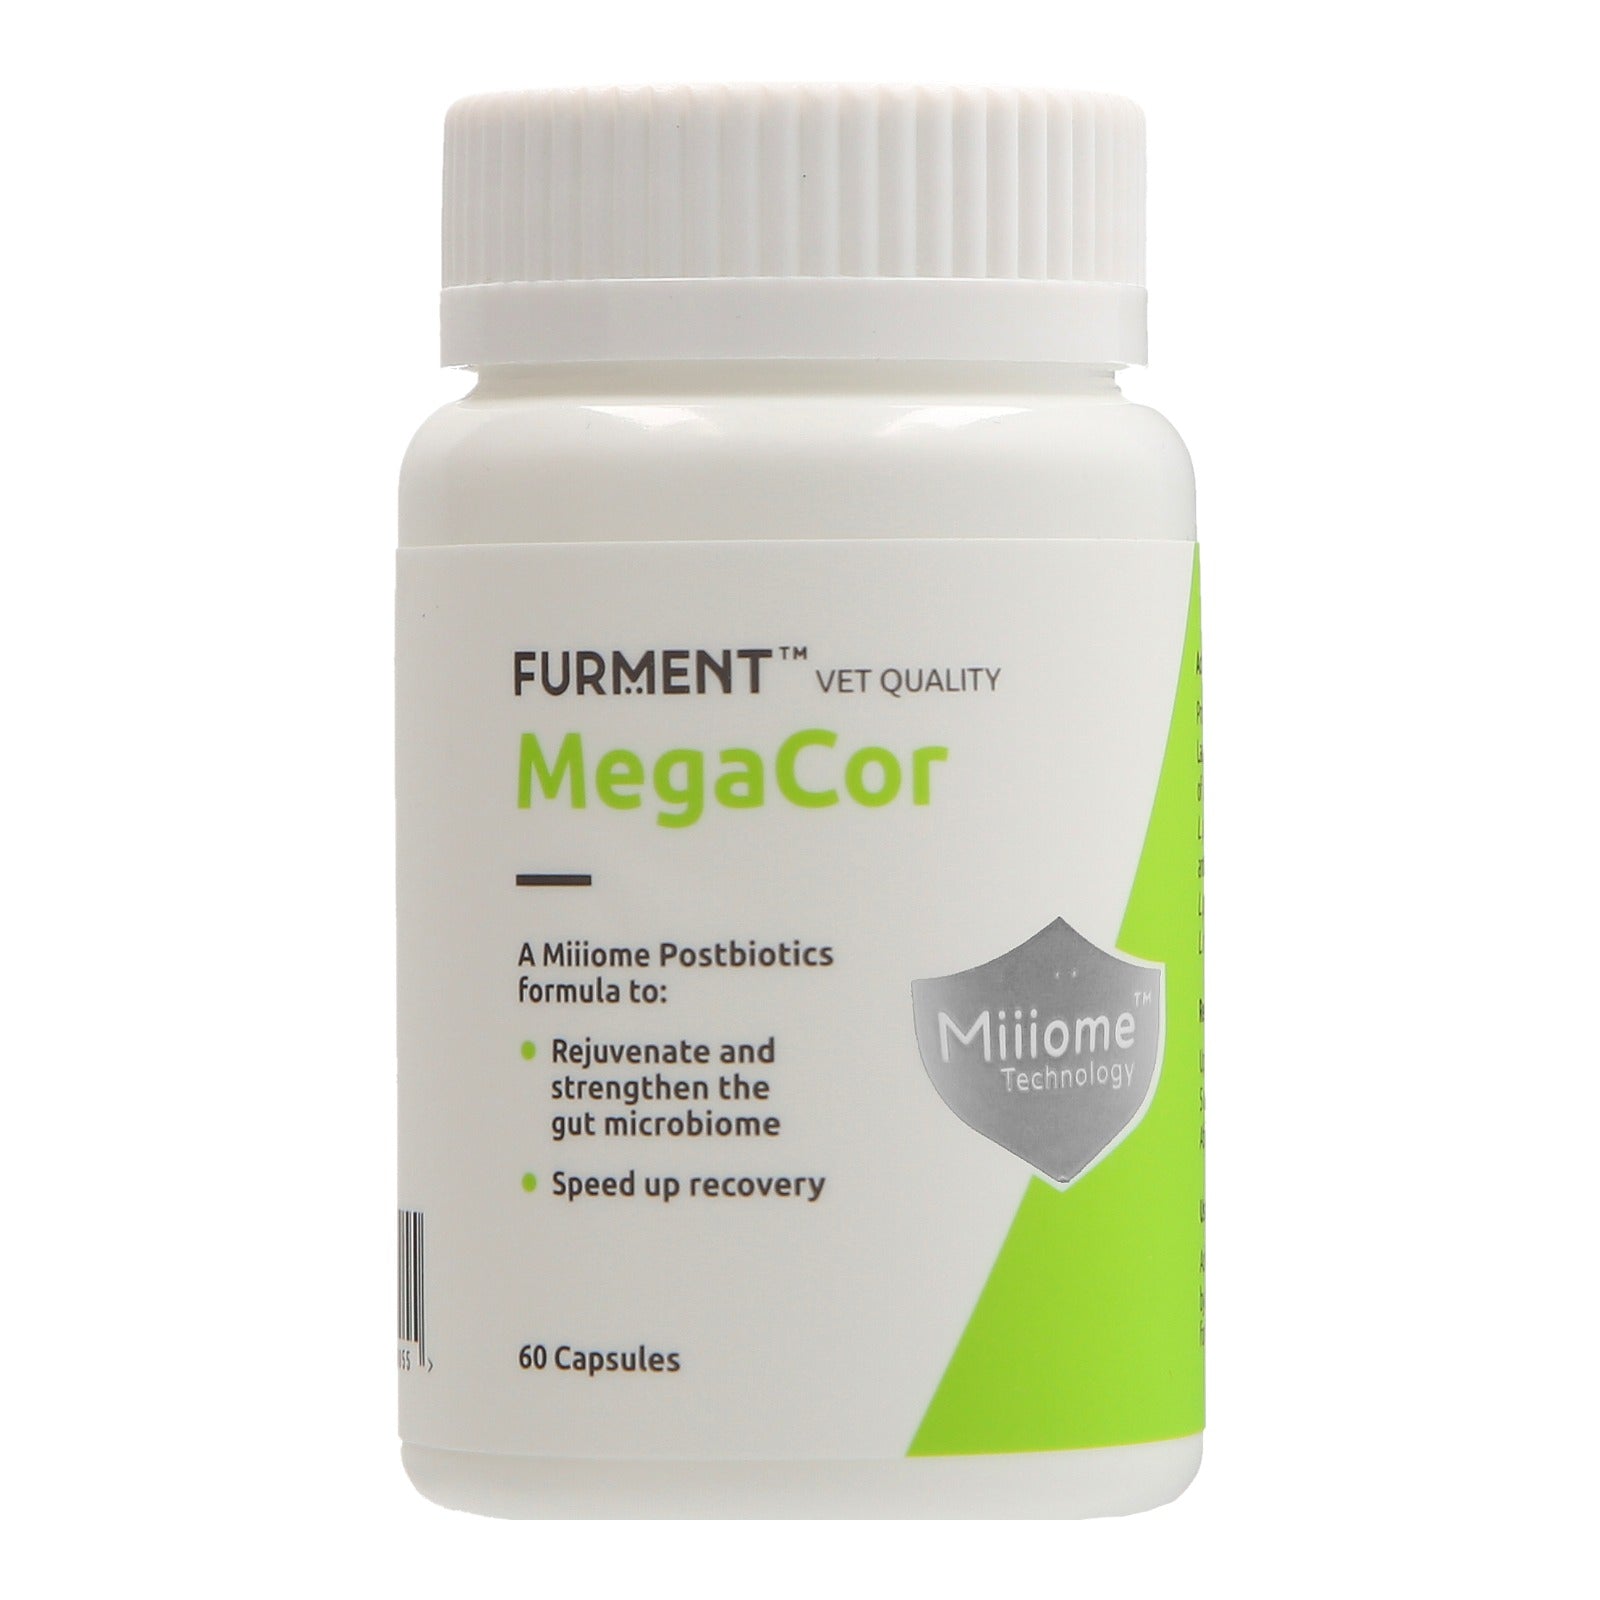 Furment MegaCor Postbiotics Healthy Digestive Recovery Supplement for Dogs Cats